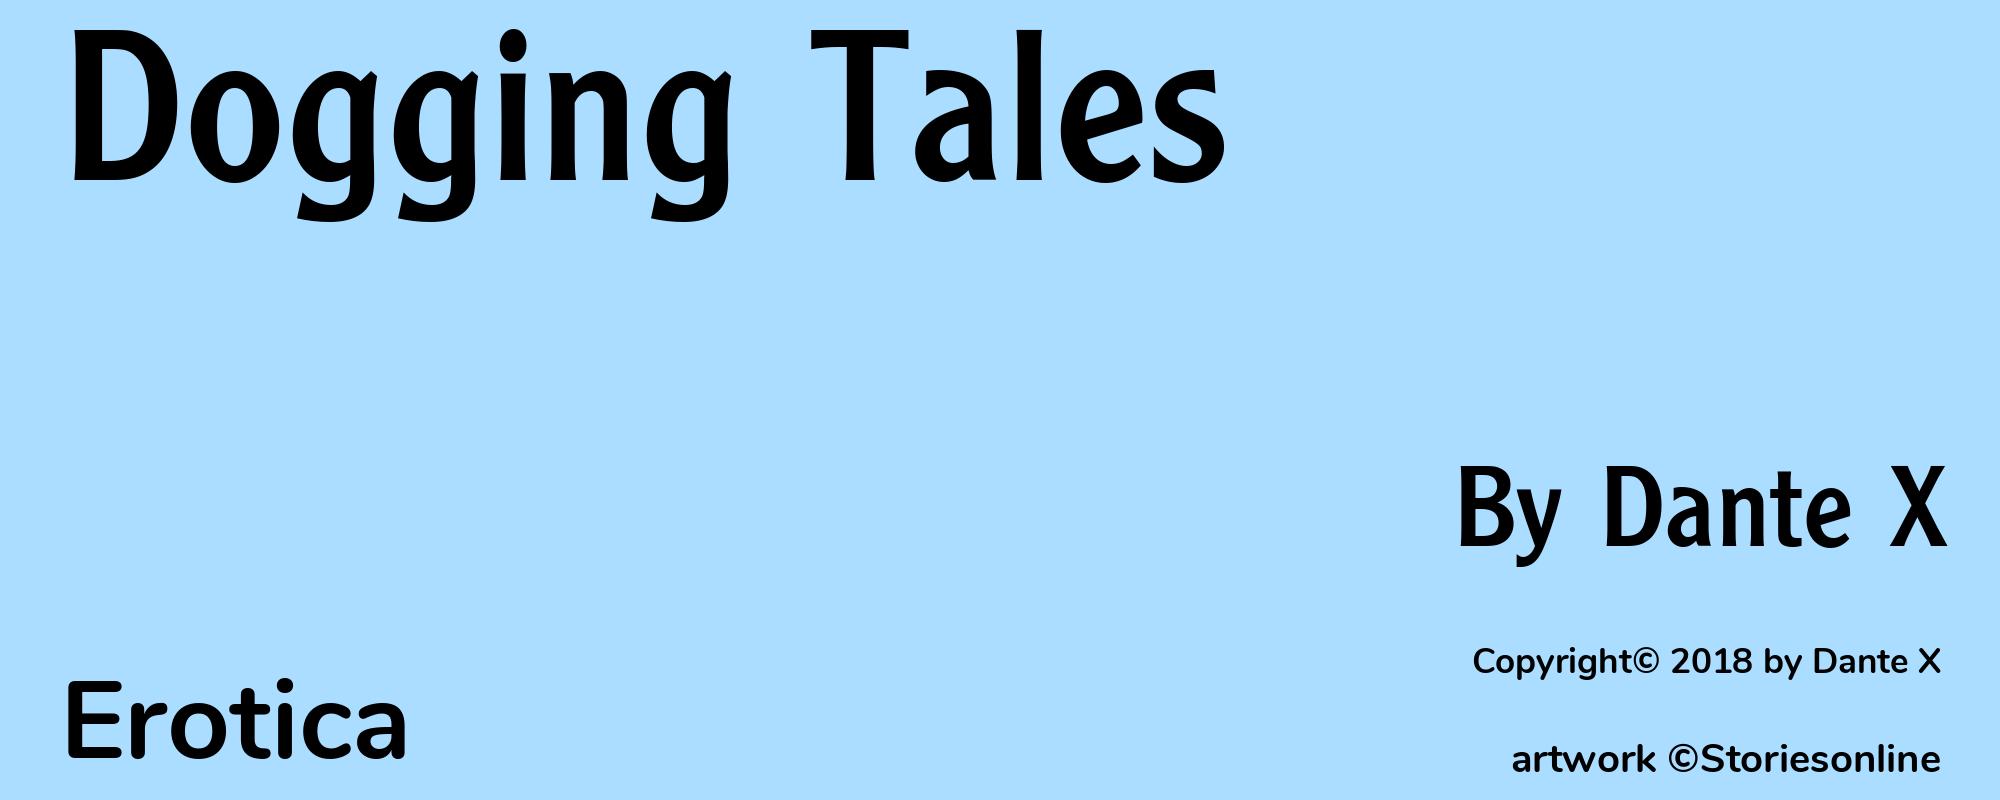 Dogging Tales - Cover